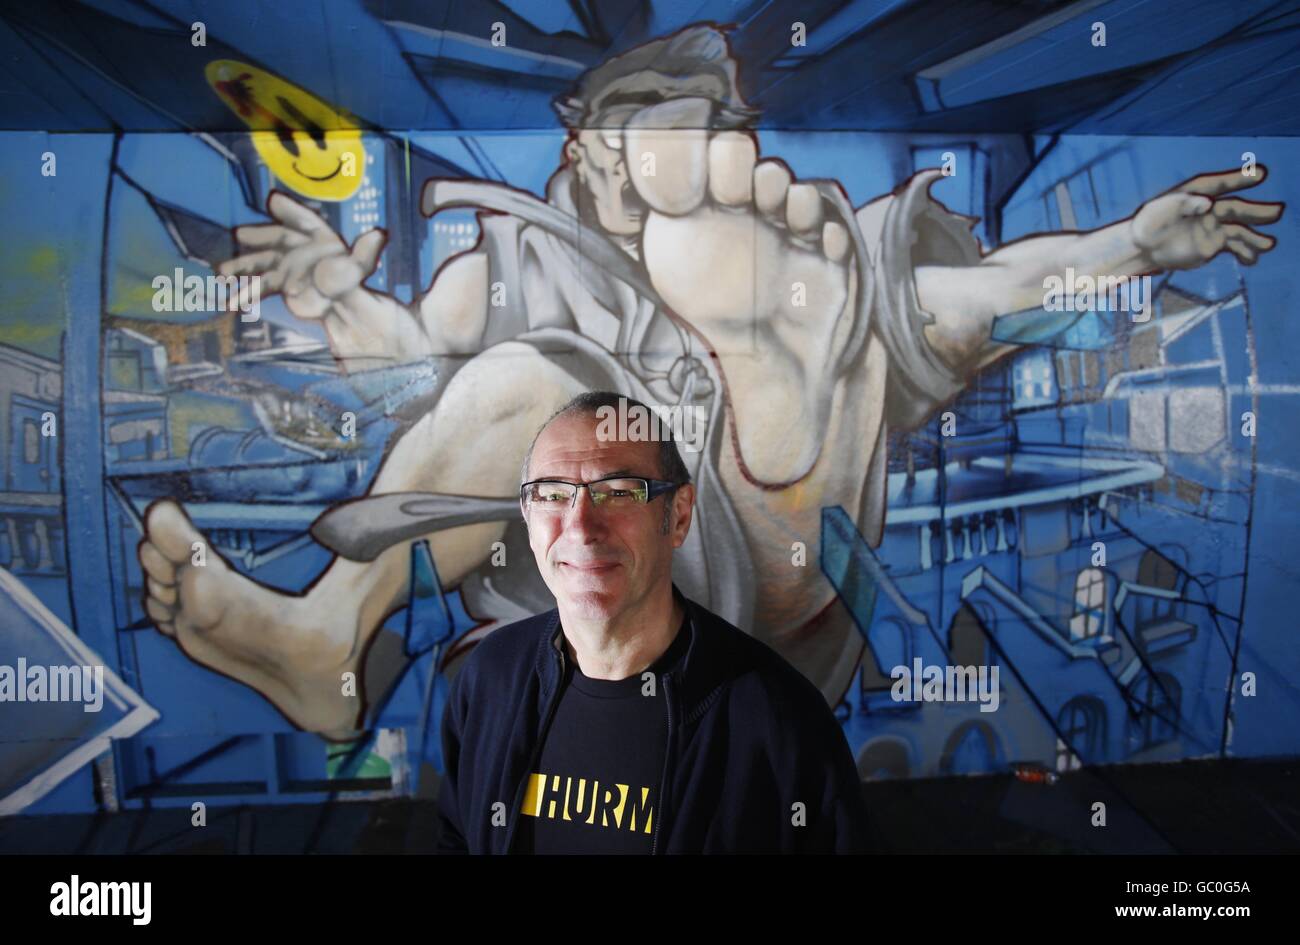 Dave Gibbons, the original illustrator of The Watchmen comics in front of artwork by graffiti artist Chu which depicts a scene from Watchmen, now available on DVD and Blu-ray, at the South Bank Skate Park in London. PRESS ASSOCIATION Photo. Picture date: Tuesday July 28, 2009. The visually spectacular film, directed by Zack Snyder, is based on the 1980s comic book series of the same name created by Alan Moore and illustrated by Dave Gibbons. Photo credit should read: David Parry/PA Wire Stock Photo